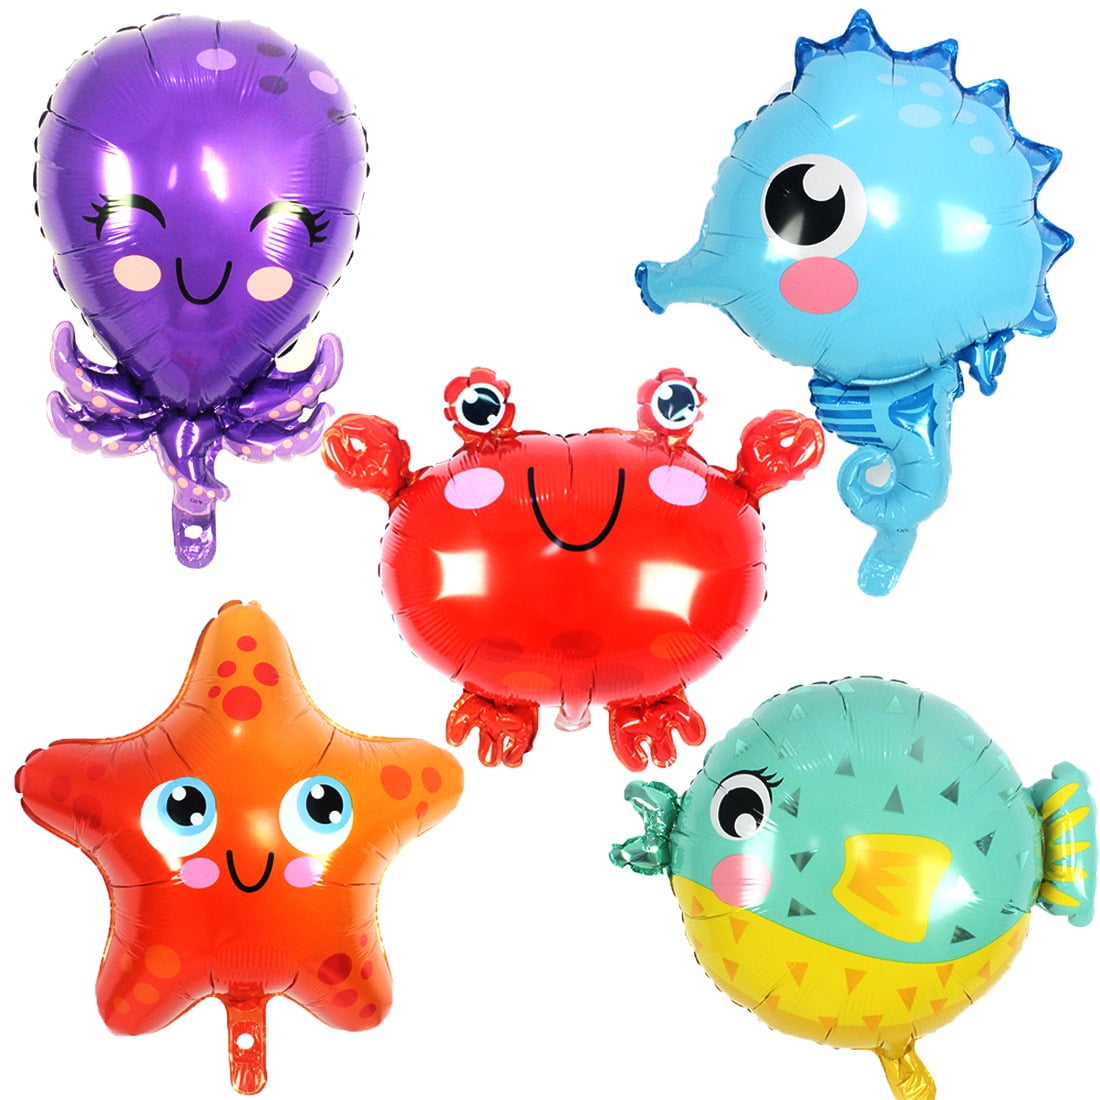 5pcs Ocean Animals Balloons Under The Sea Balloons Ocean Party Supplies  Decorations Seahorse Starfish Crab Octopus Puffer Fish Balloon for Birthday  Under The Sea, Ocean Party Decorations 